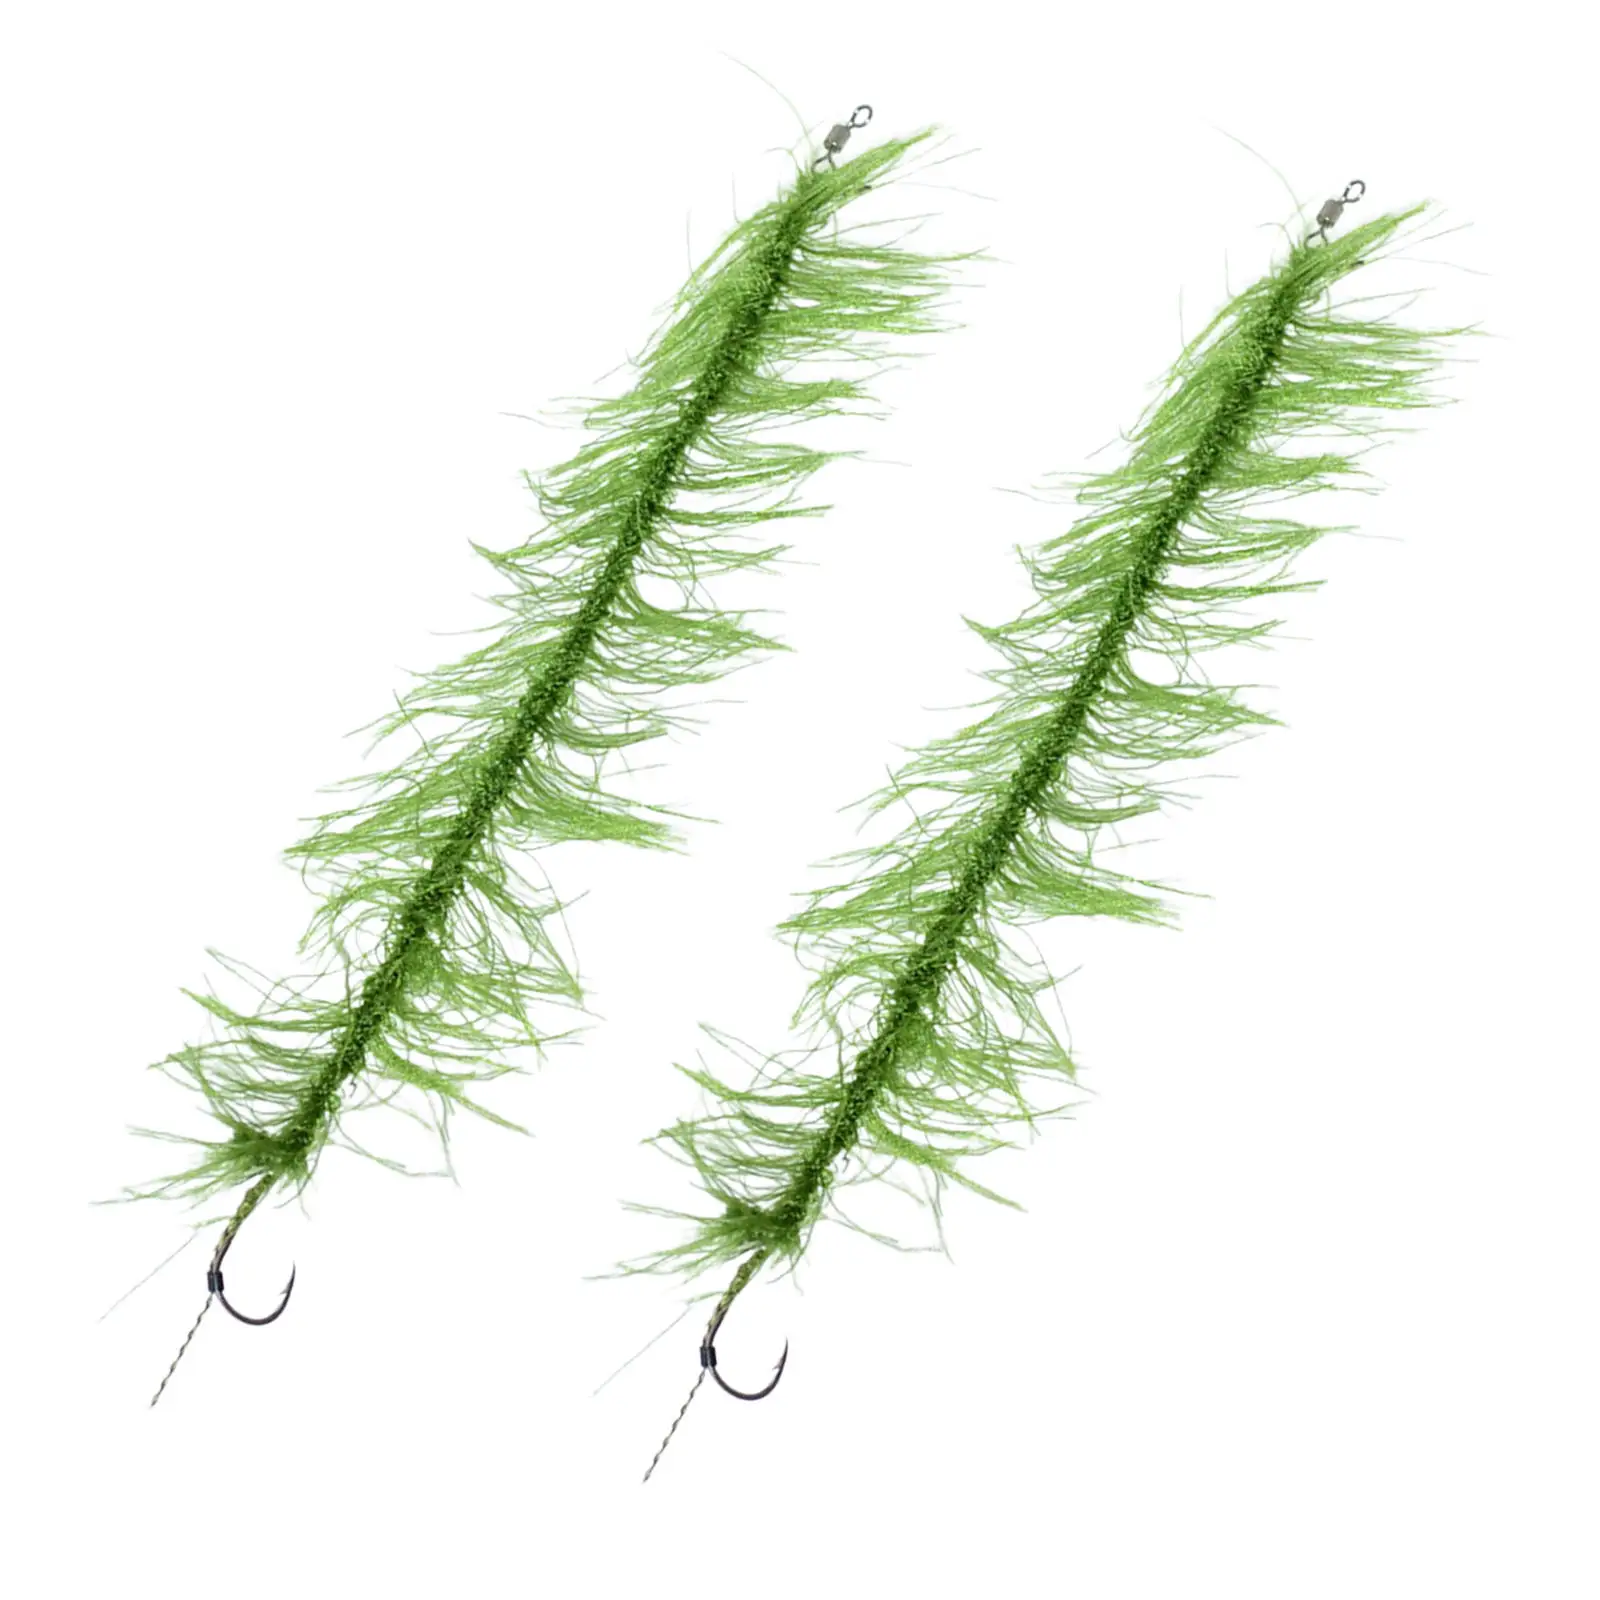 2x Carp Fishing 20cm Made Fish Hair Rigs Terminal Tackle with Hook and Weed Line Fishing Tackle Accessories